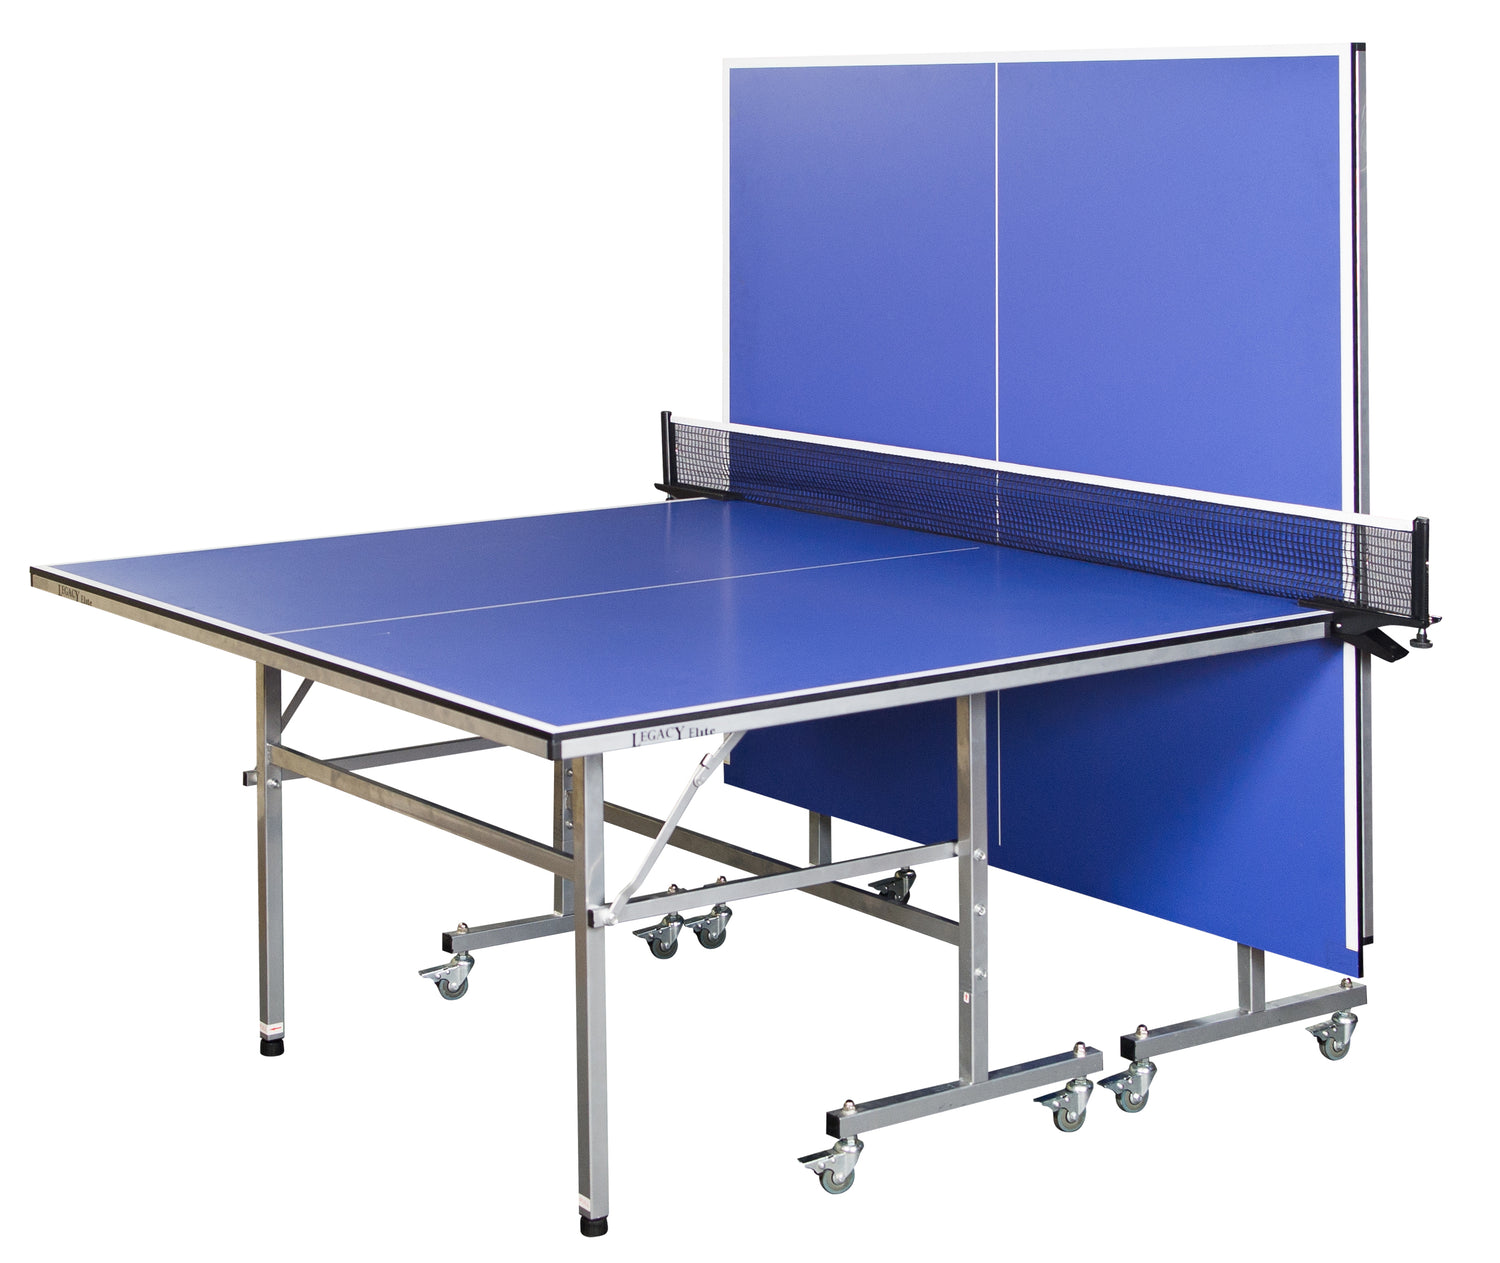 Legacy Billiards Elite Table Tennis Table Shown with One Half Folded